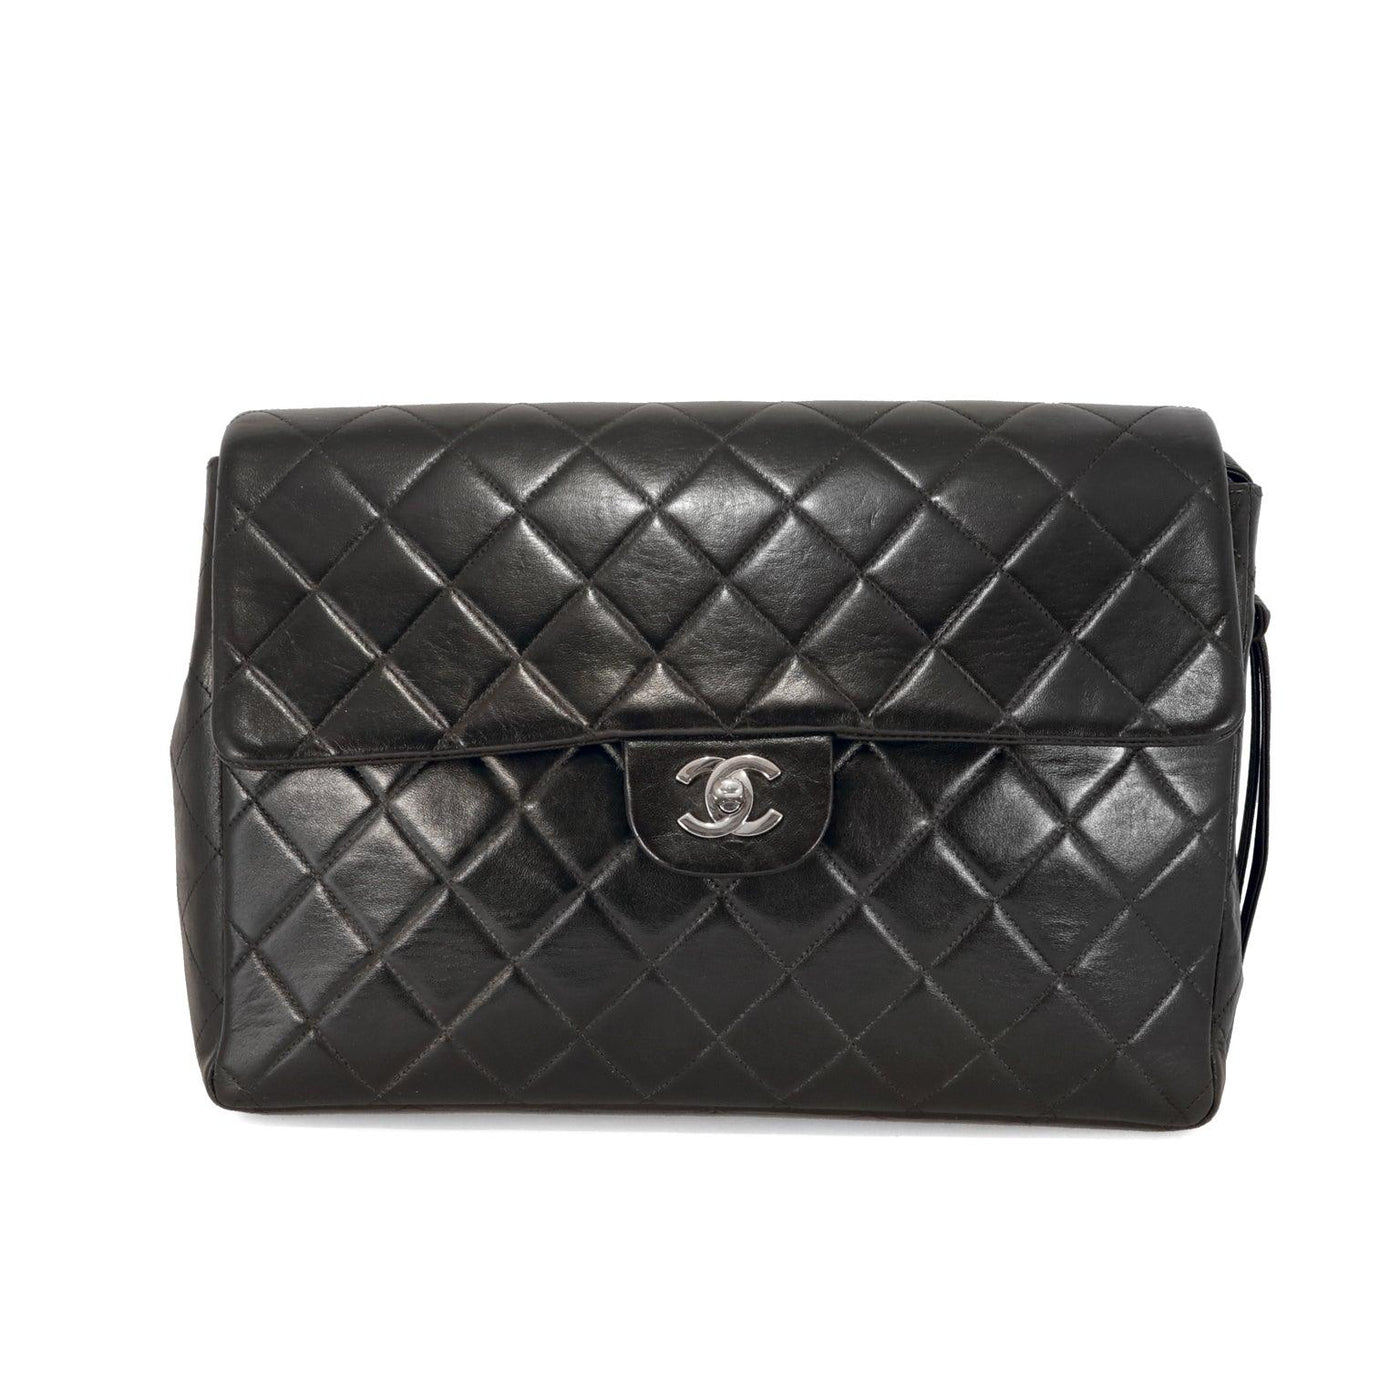 Chanel Black Lambskin Classic Flap Backpack - Only Authentics